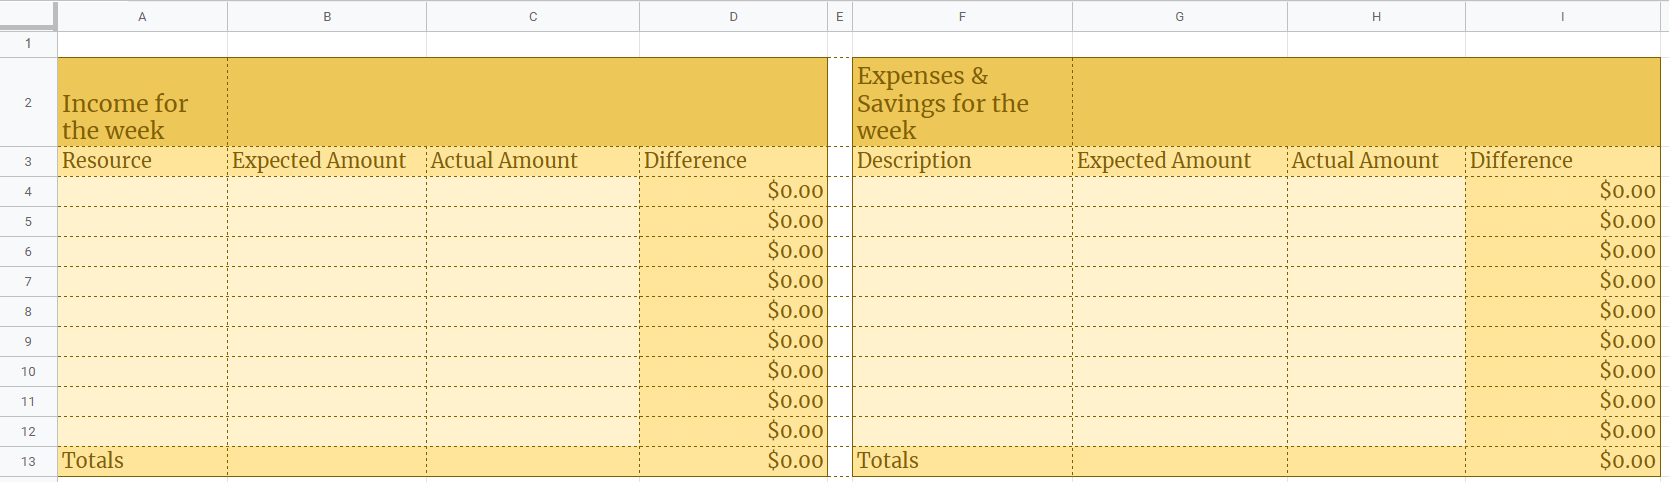 Allowance Budget Weekly Template for Kids